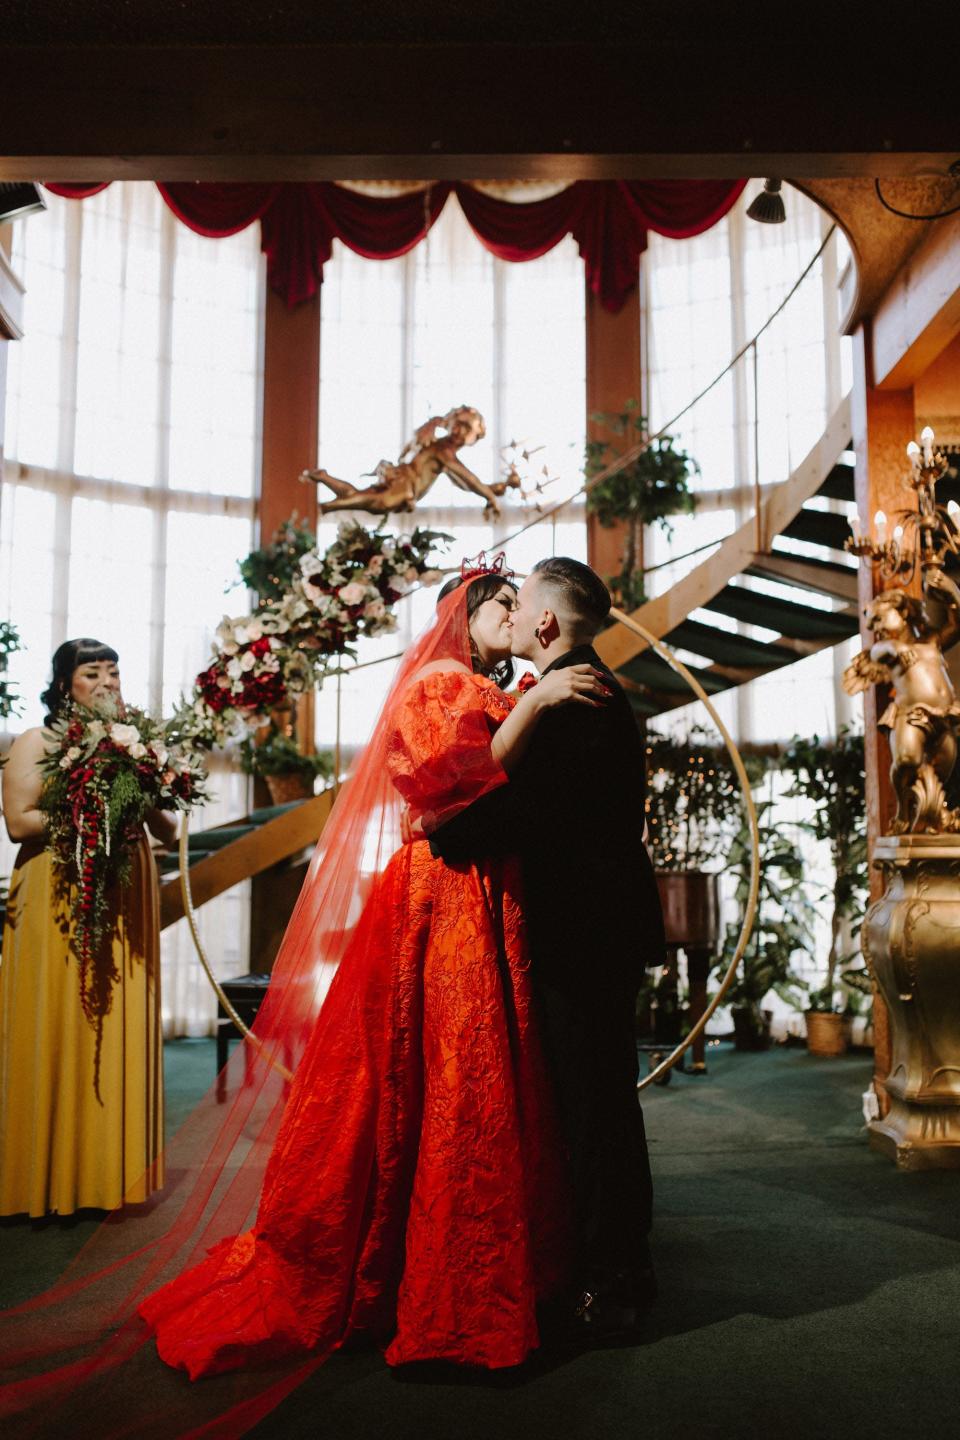 A woman in a red dress and a man in a black suit kiss during their wedding ceremony.